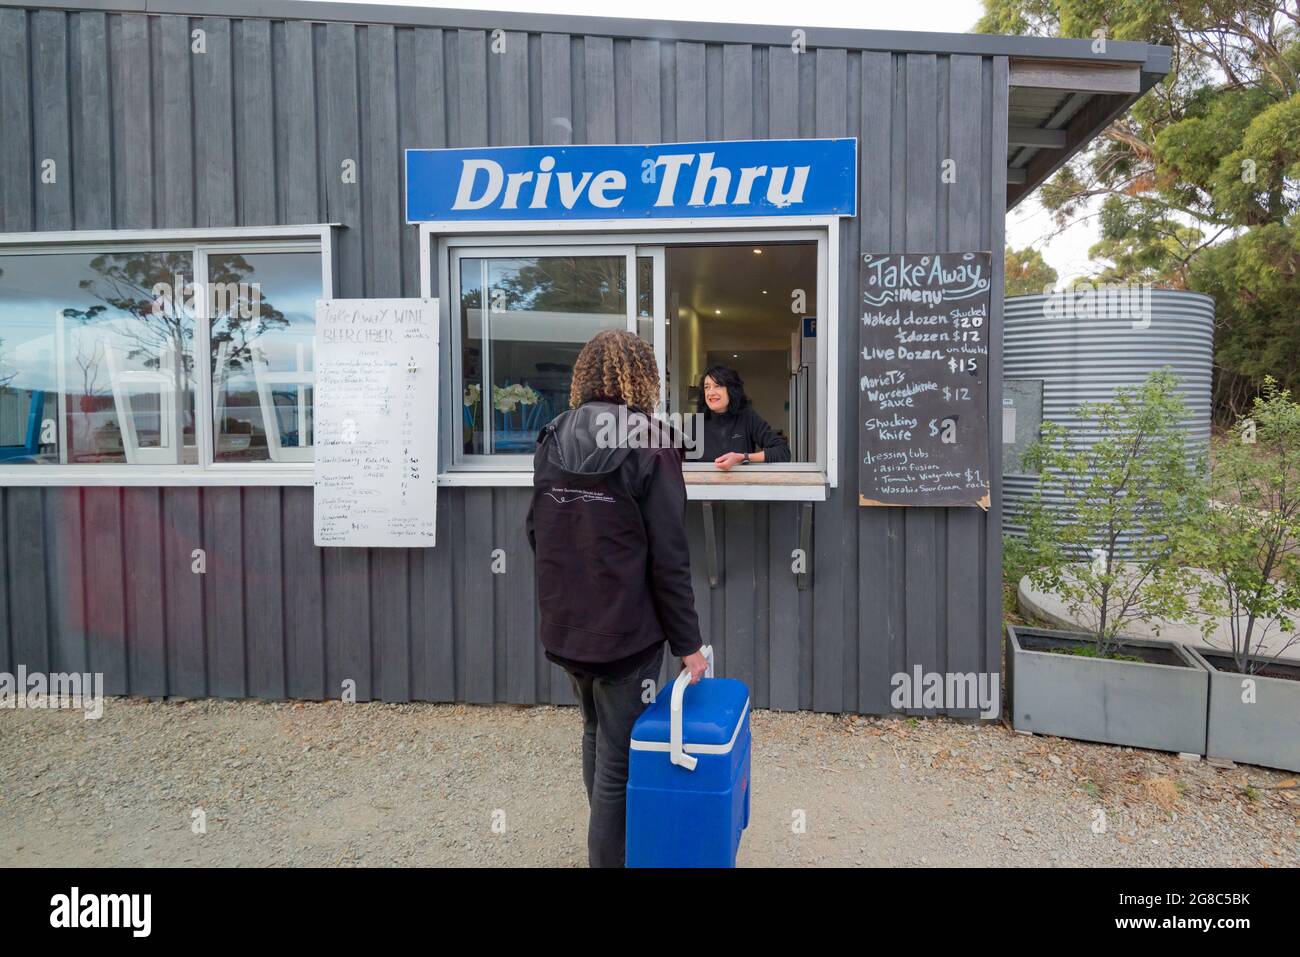 Get Shucked Oysters on Bruny Island on the south eastern tip of Tasmania, Australia claim to have the world's first Oyster Drive-Through. Stock Photo